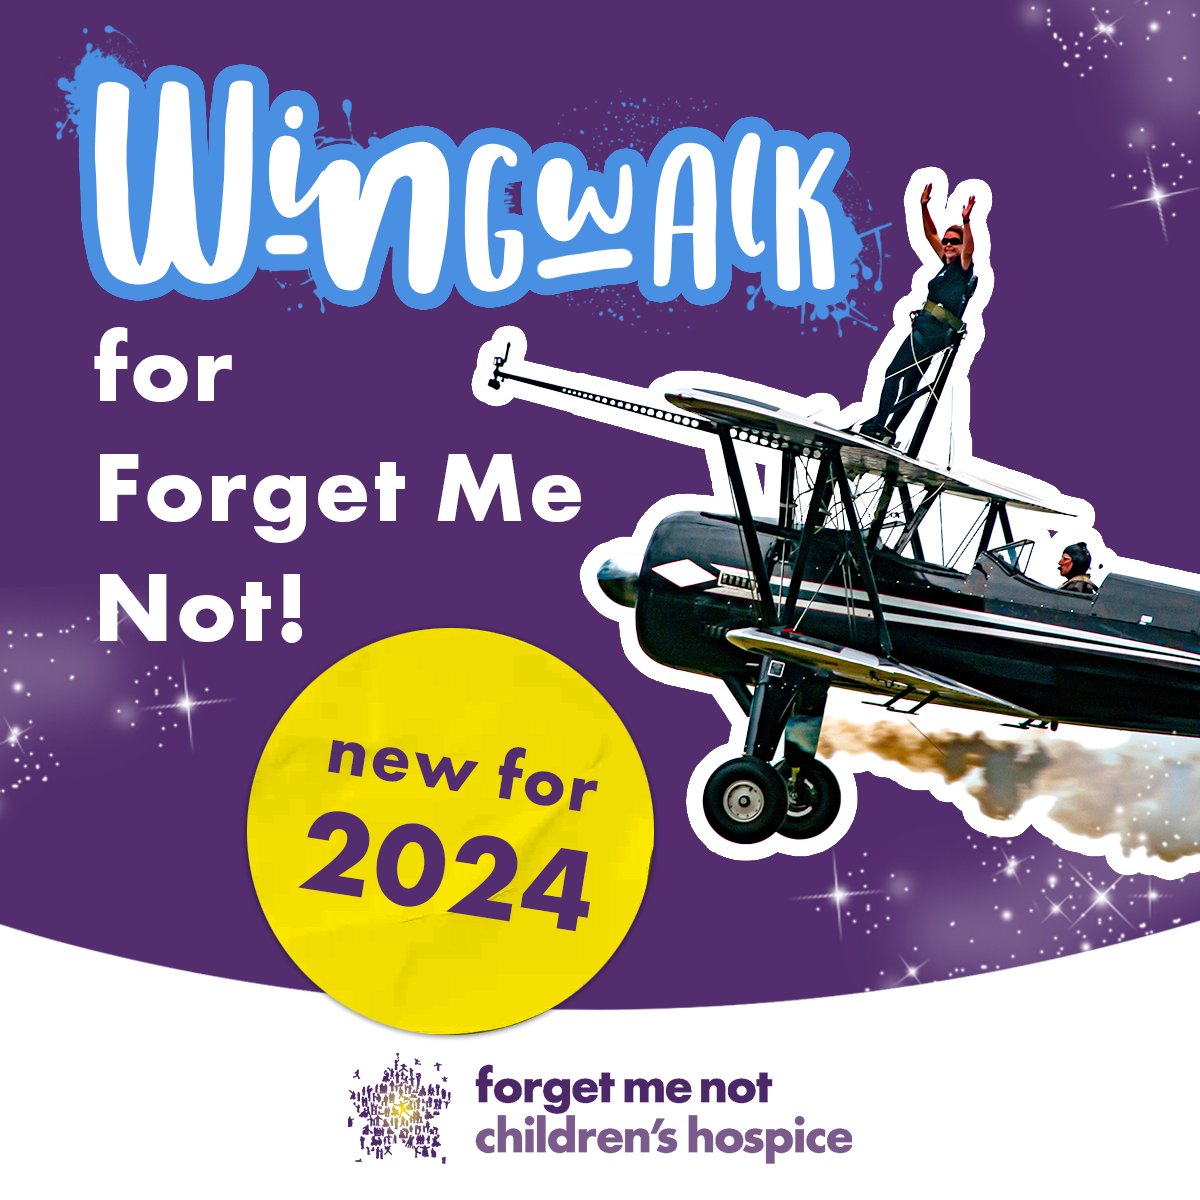 Looking for a white knuckle challenge? How about performing a wingwalk for Forget Me Not? 🛫 We have several dates available for the thrill-seekers out there looking to get the adrenaline pumping. If you’re interested, get in touch at events@forgetmenotchild.co.uk